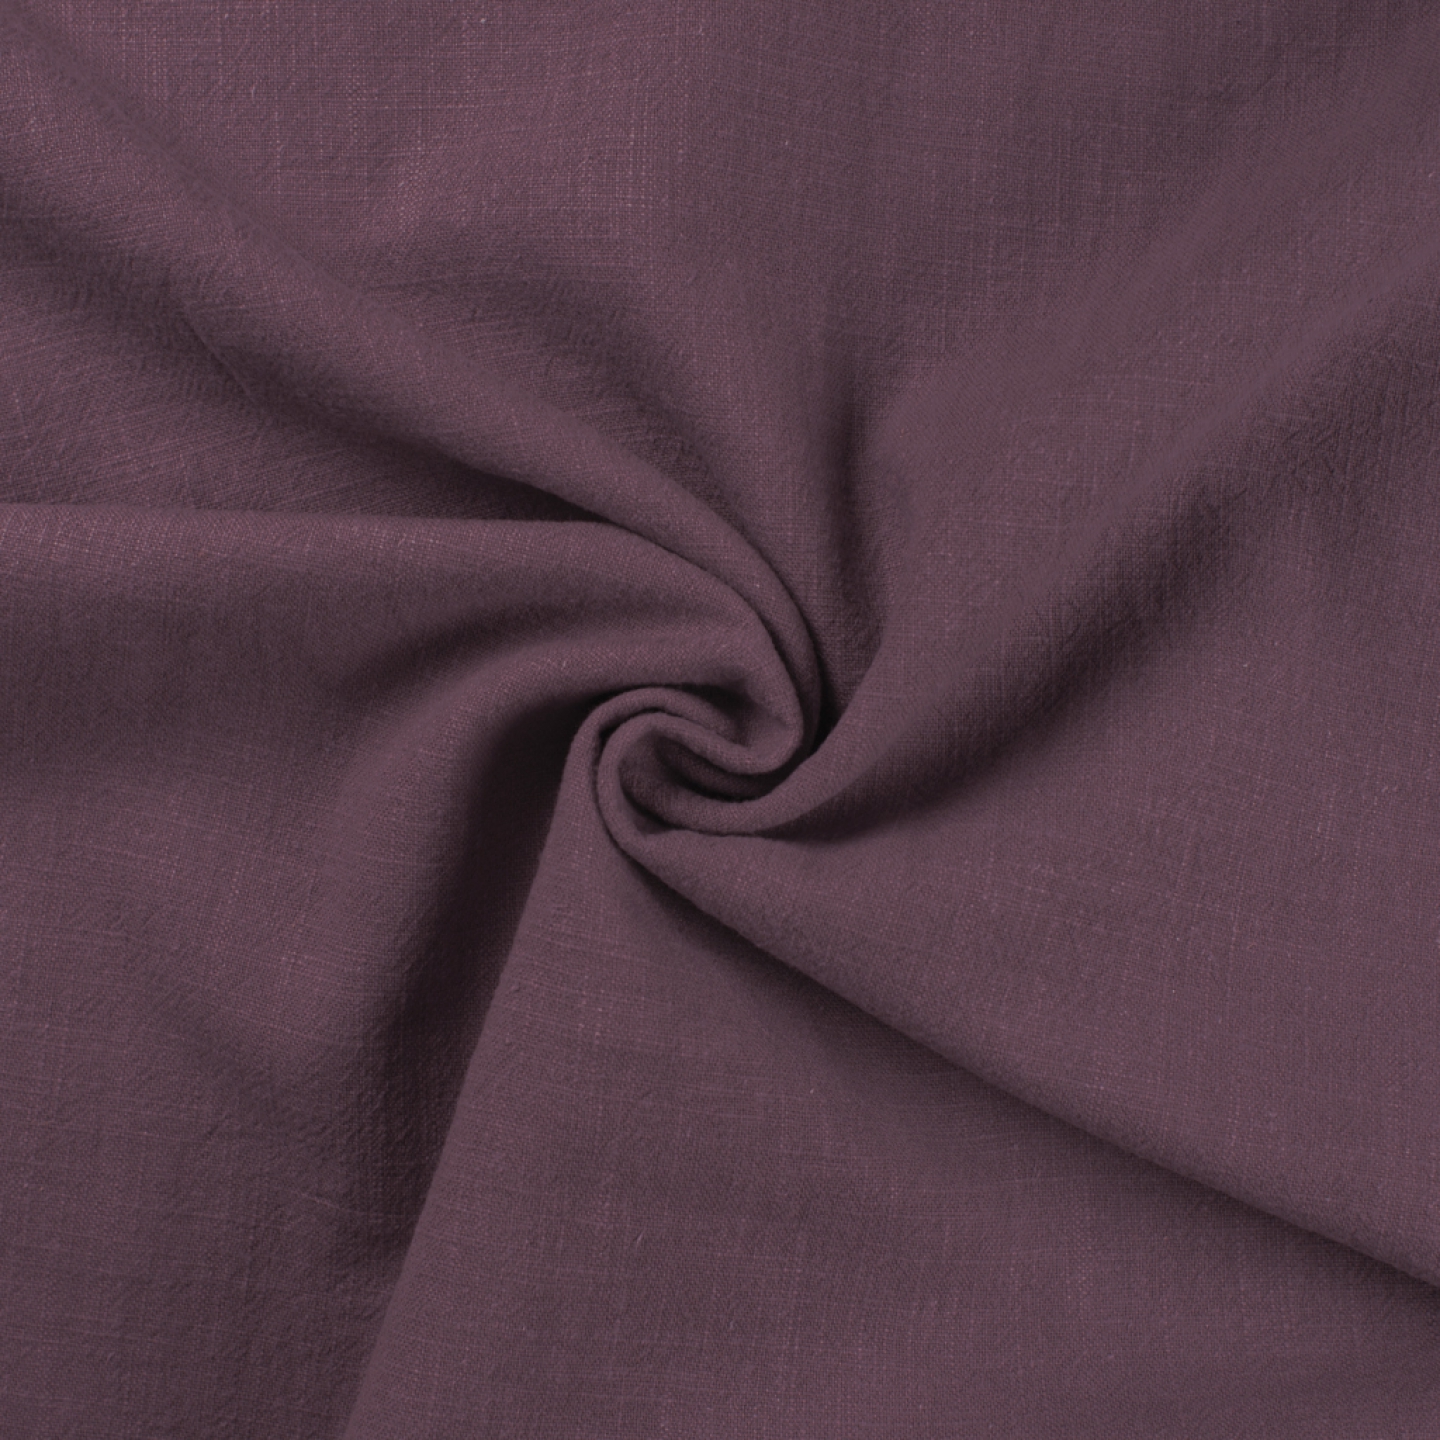 Stone Washed Linen Fabric in Mauve Purple